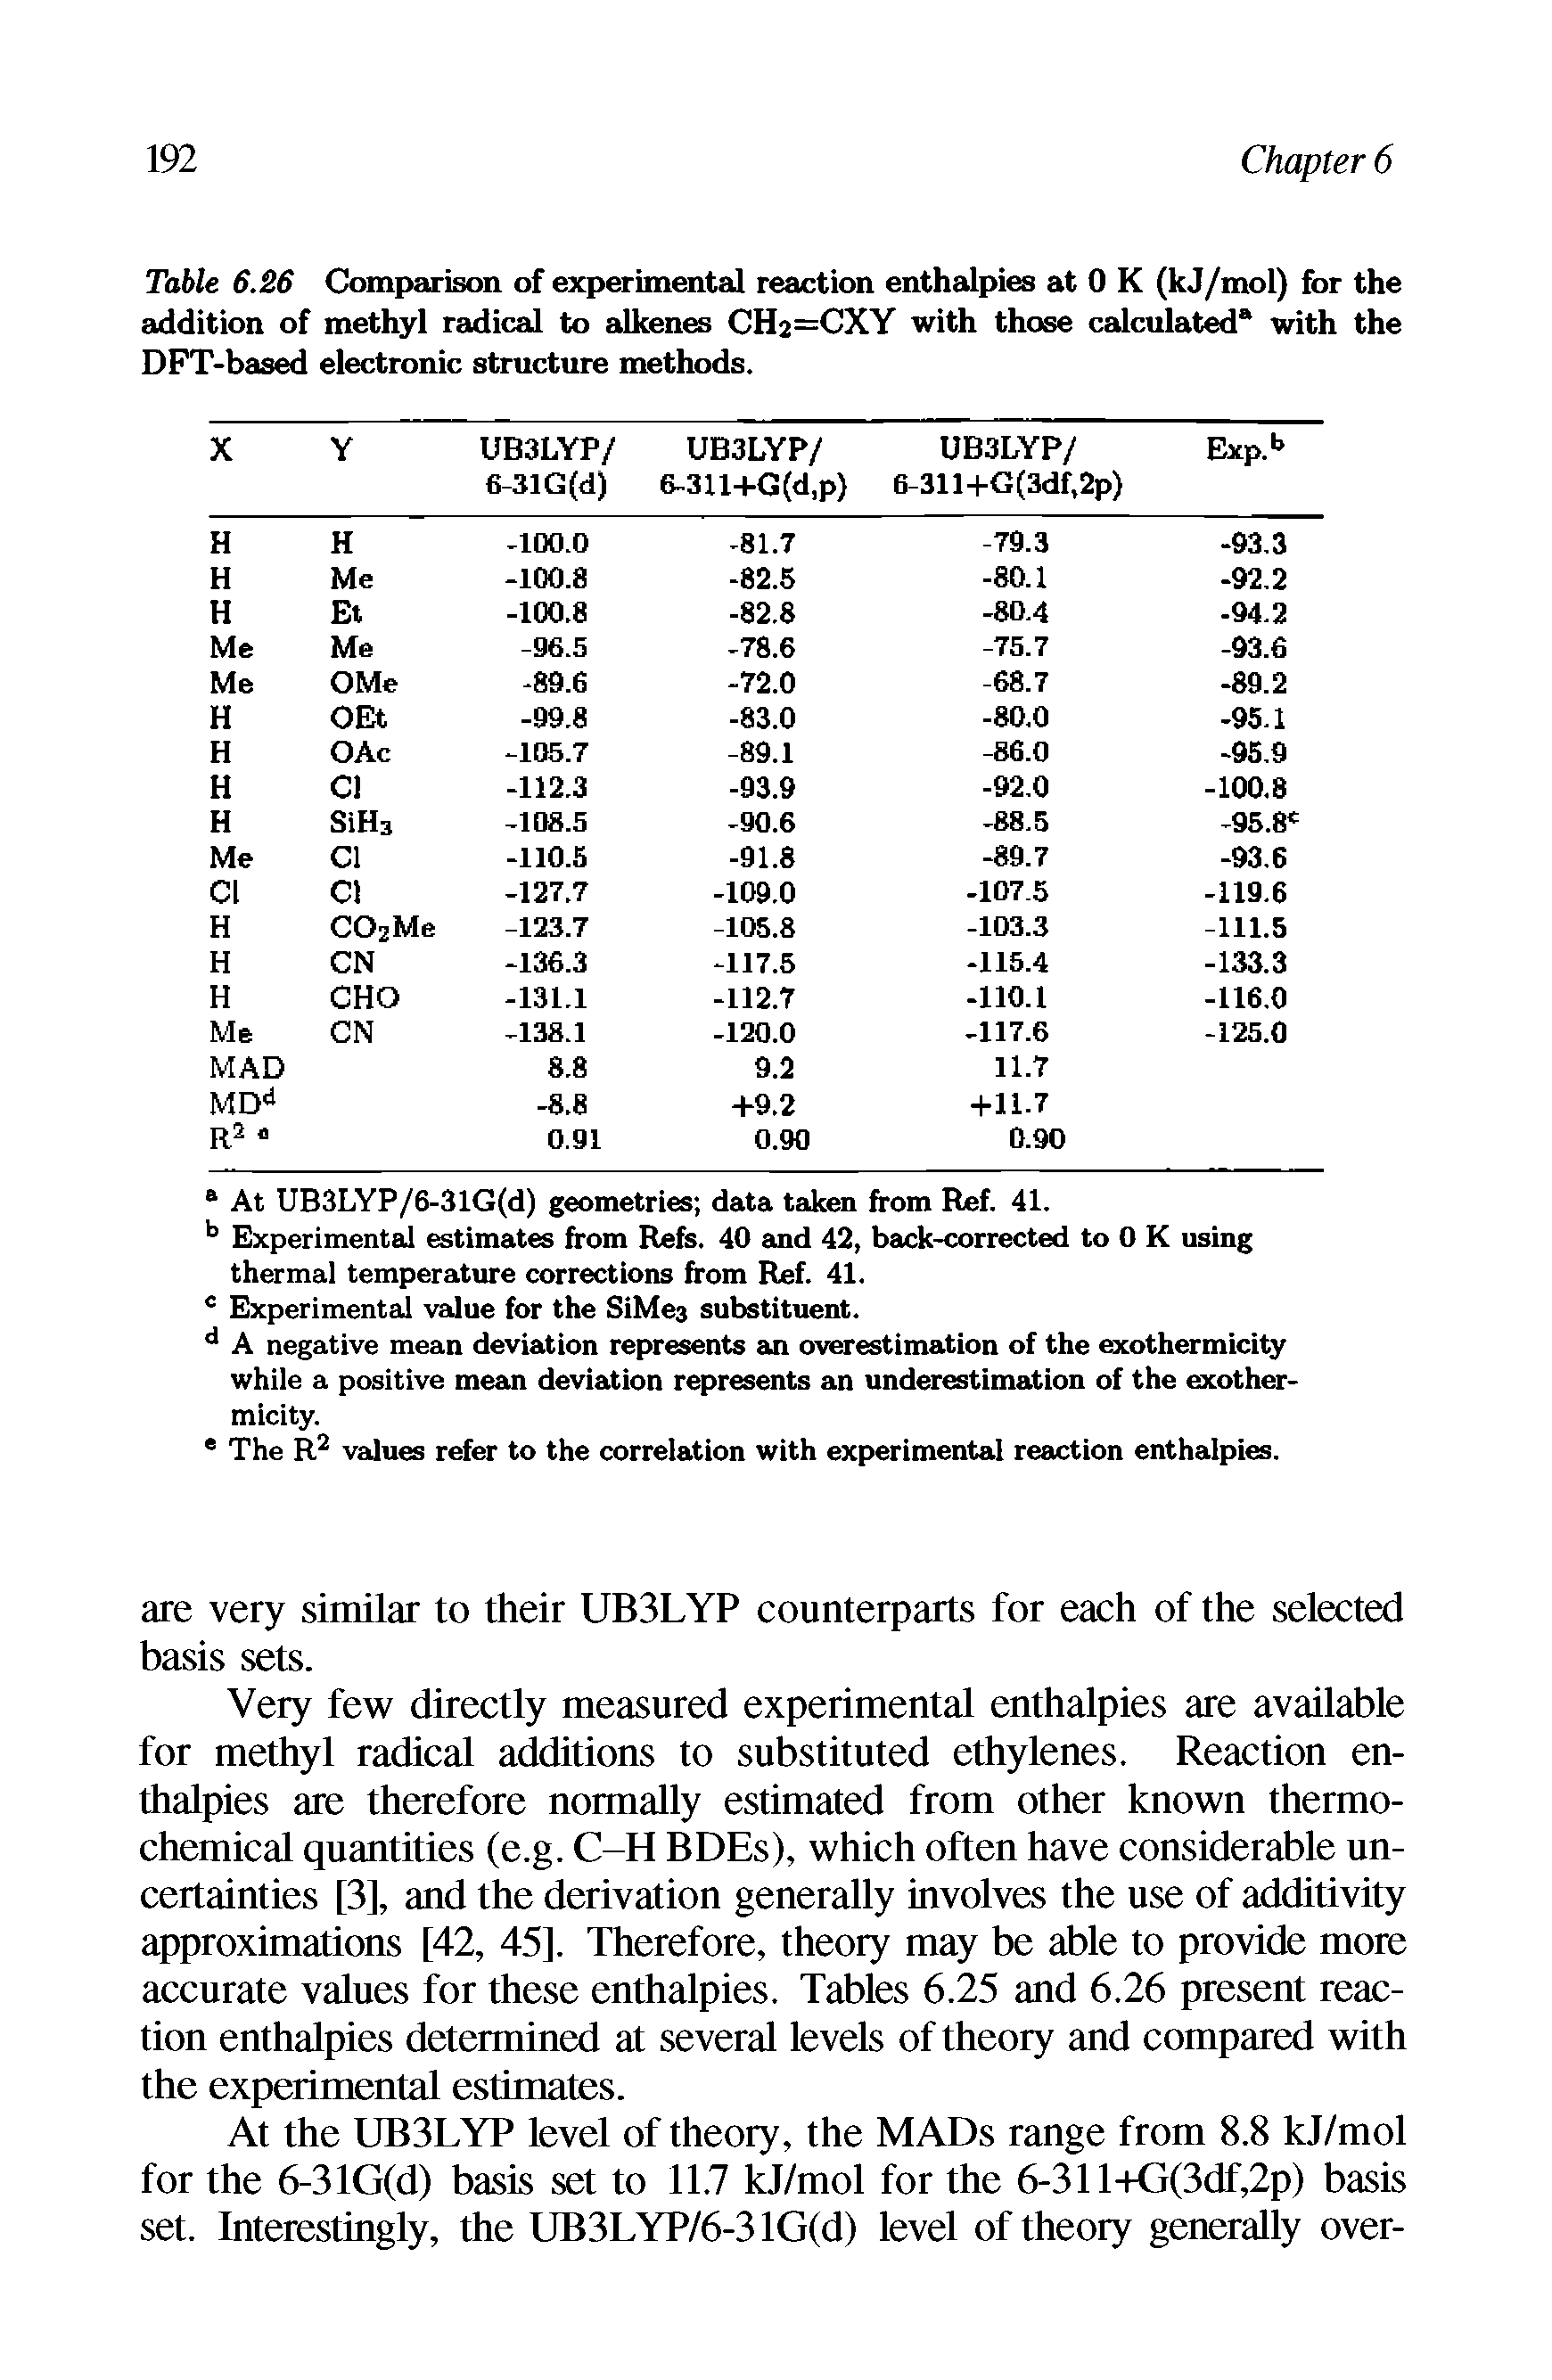 Table 6.26 Comparison of experimental reaction enthalpies at 0 K (kj/mol) for the addition of methyl radical to alkenes CH2=CXY with those calculated8 with the DFT-based electronic structure methods.